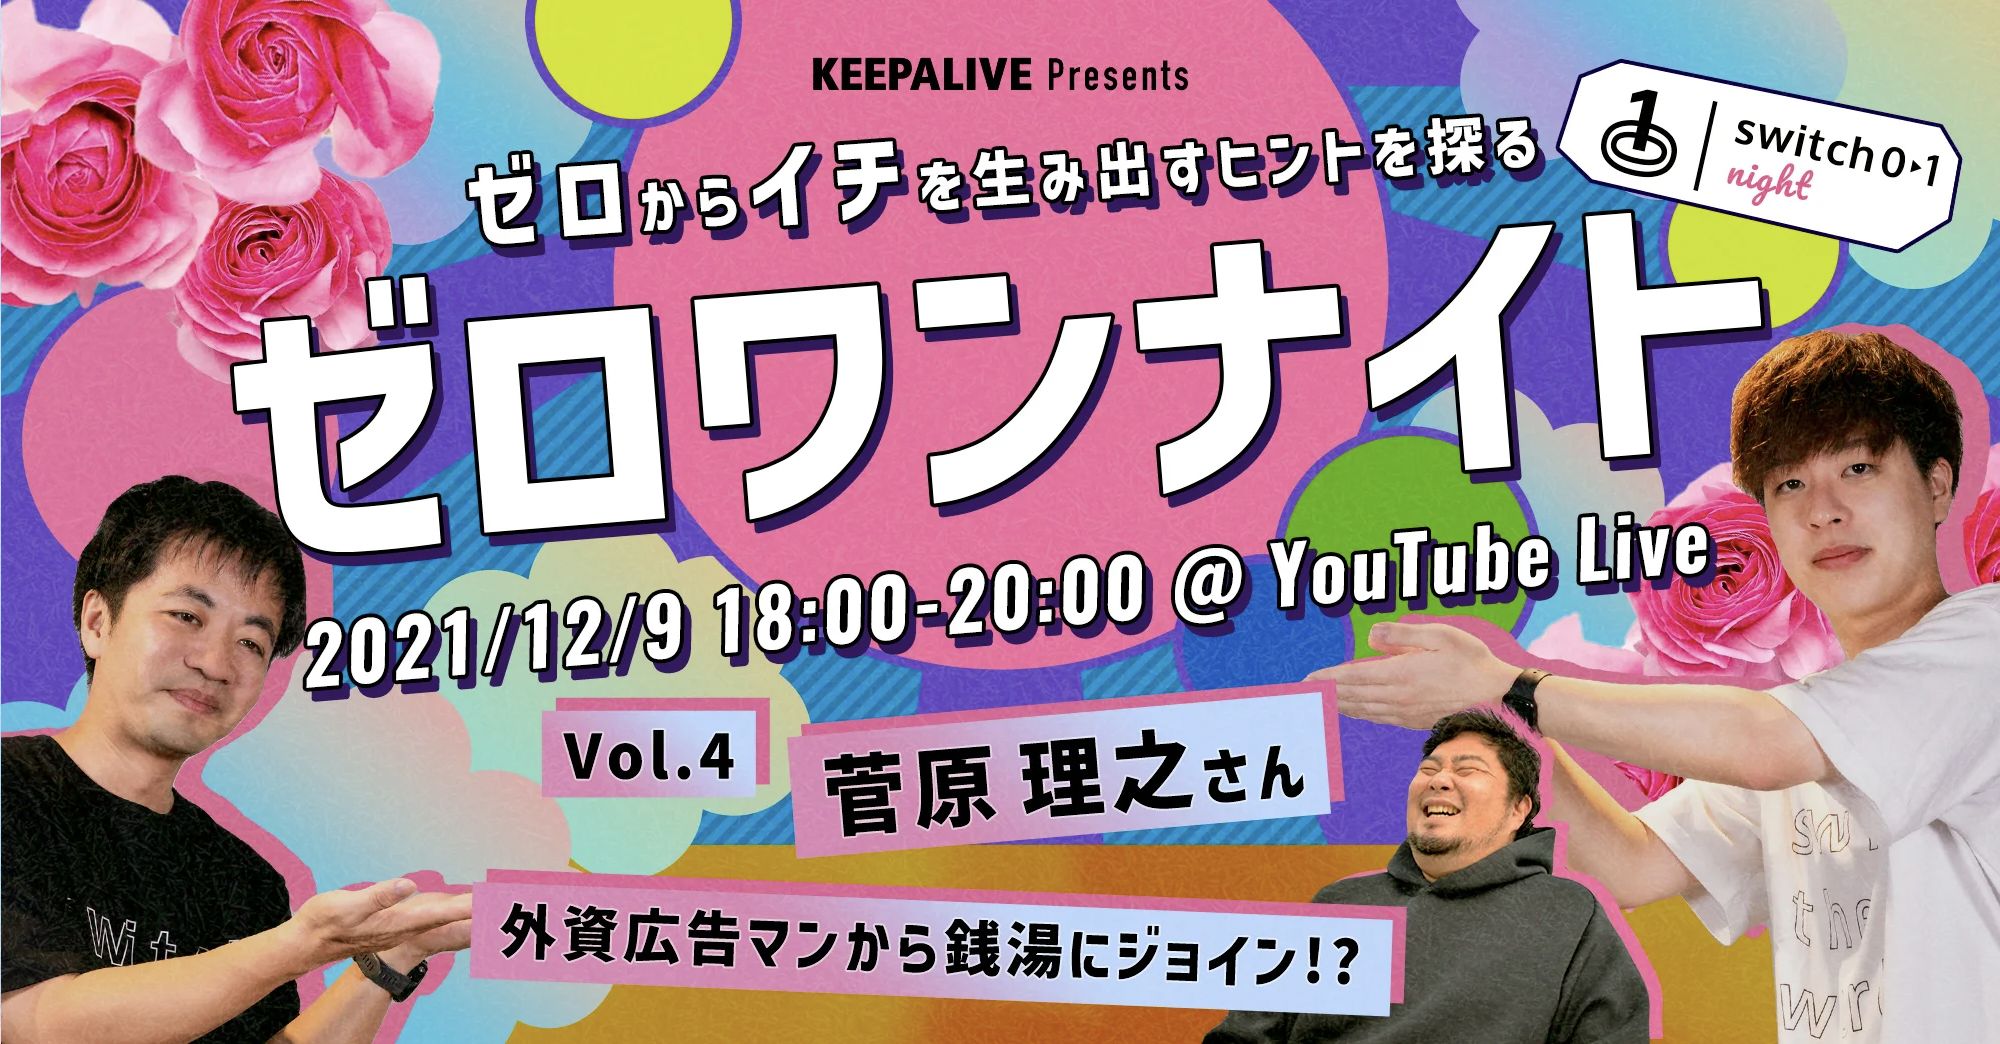 KEEPALIVE Presents ゼロワンナイト#4に弊社菅原が出演いたします